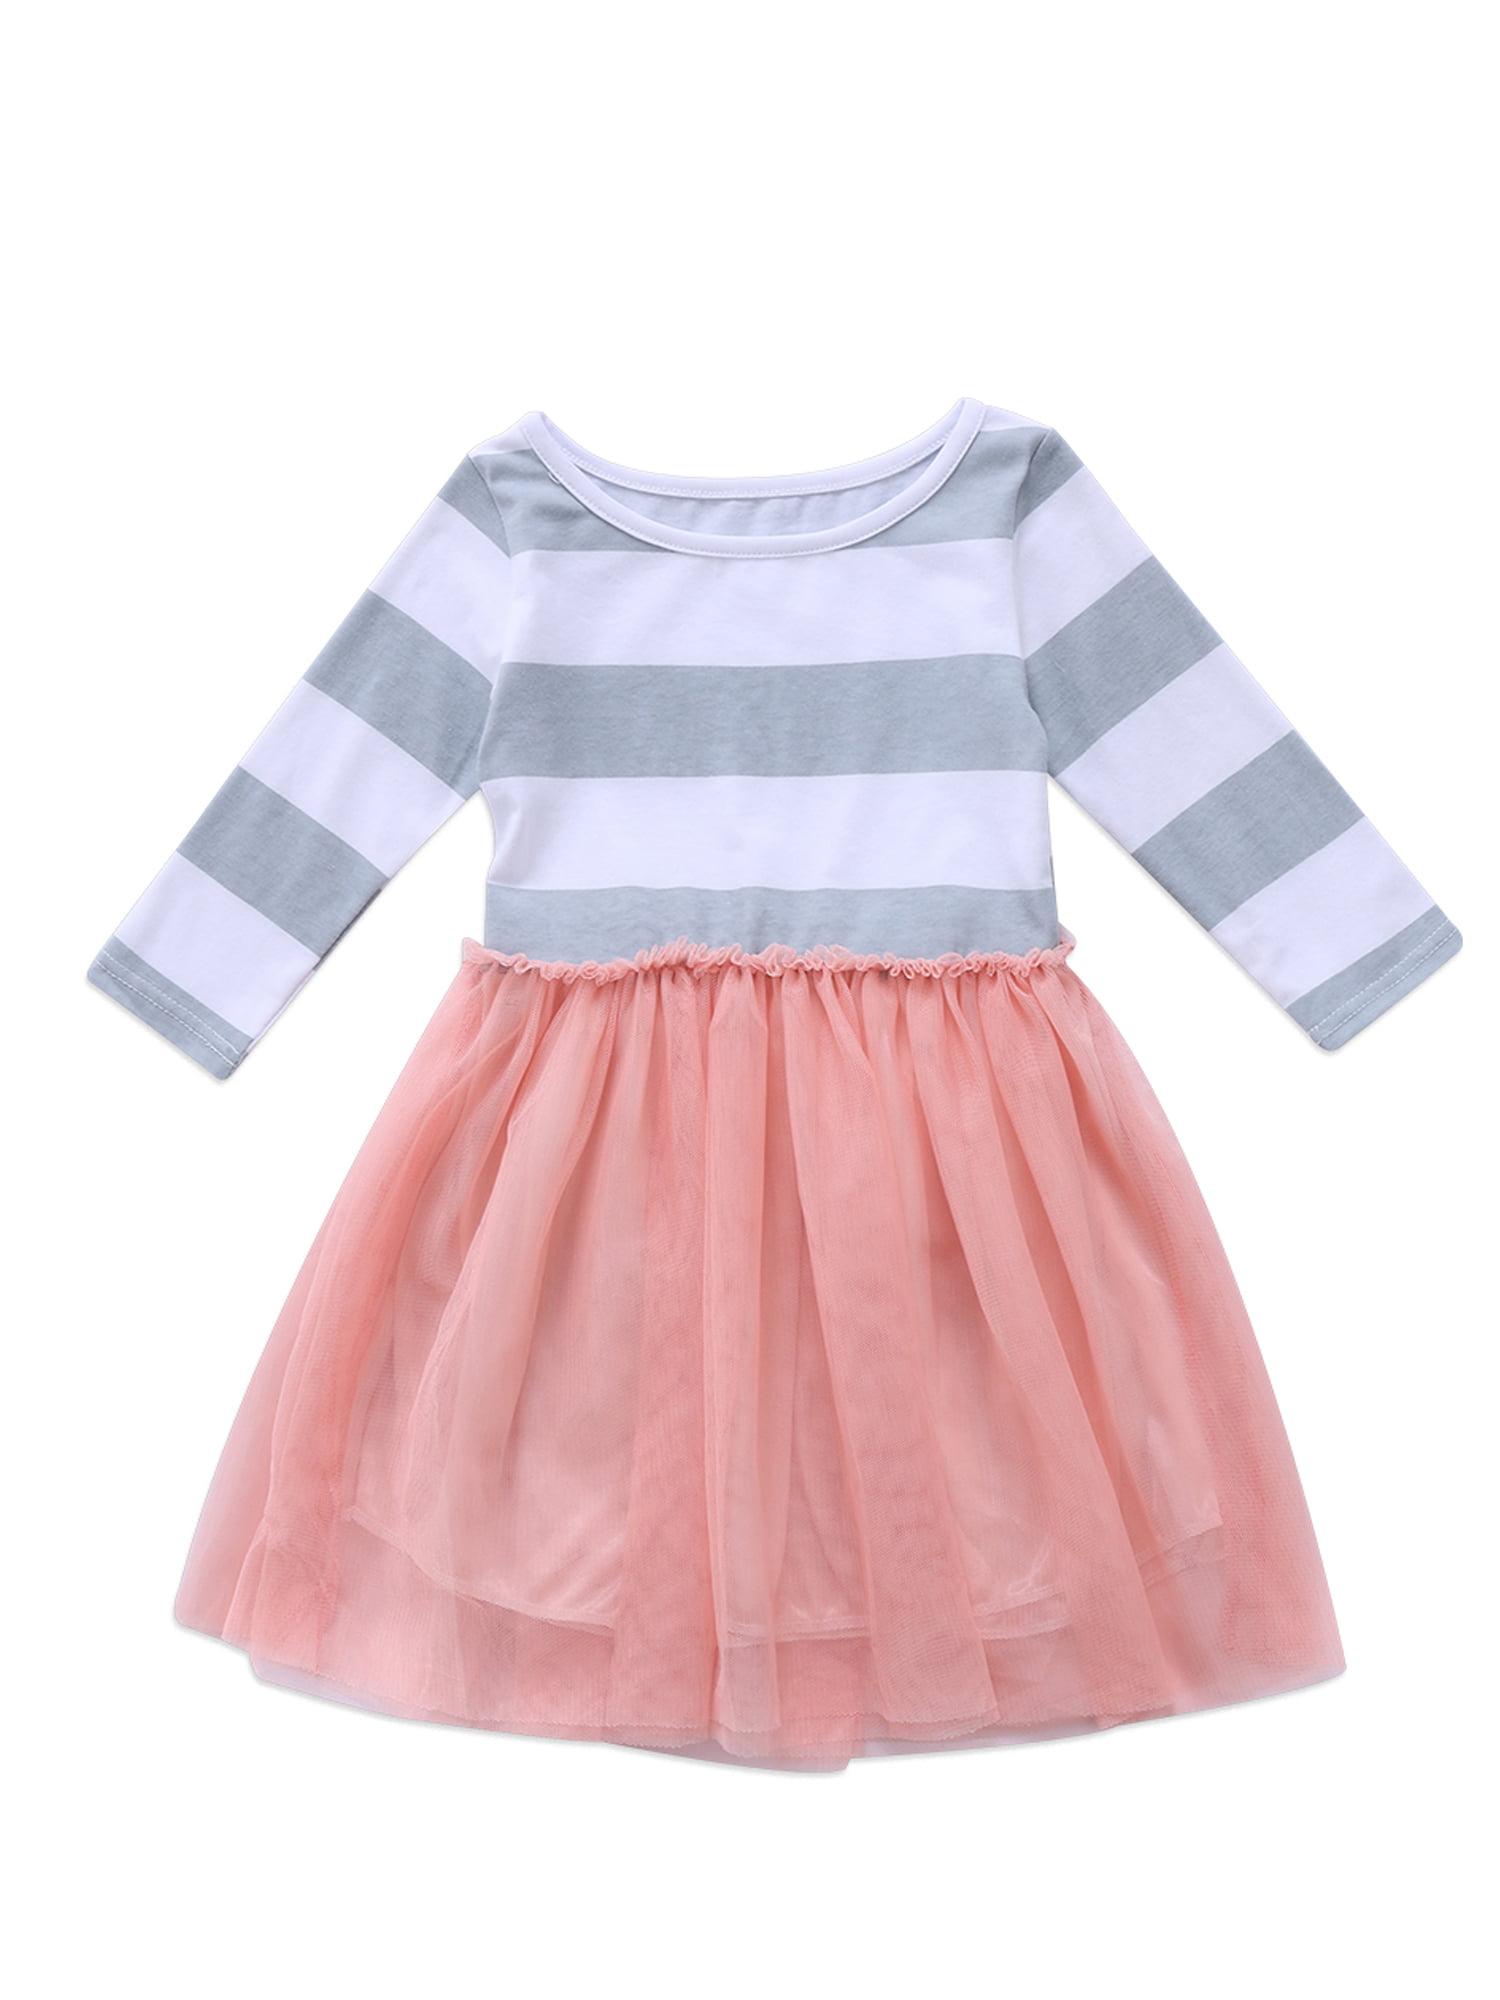 Toddler Baby Girls Summer Clothes Stripe Lace Party Pageant Princess Dresses Hot